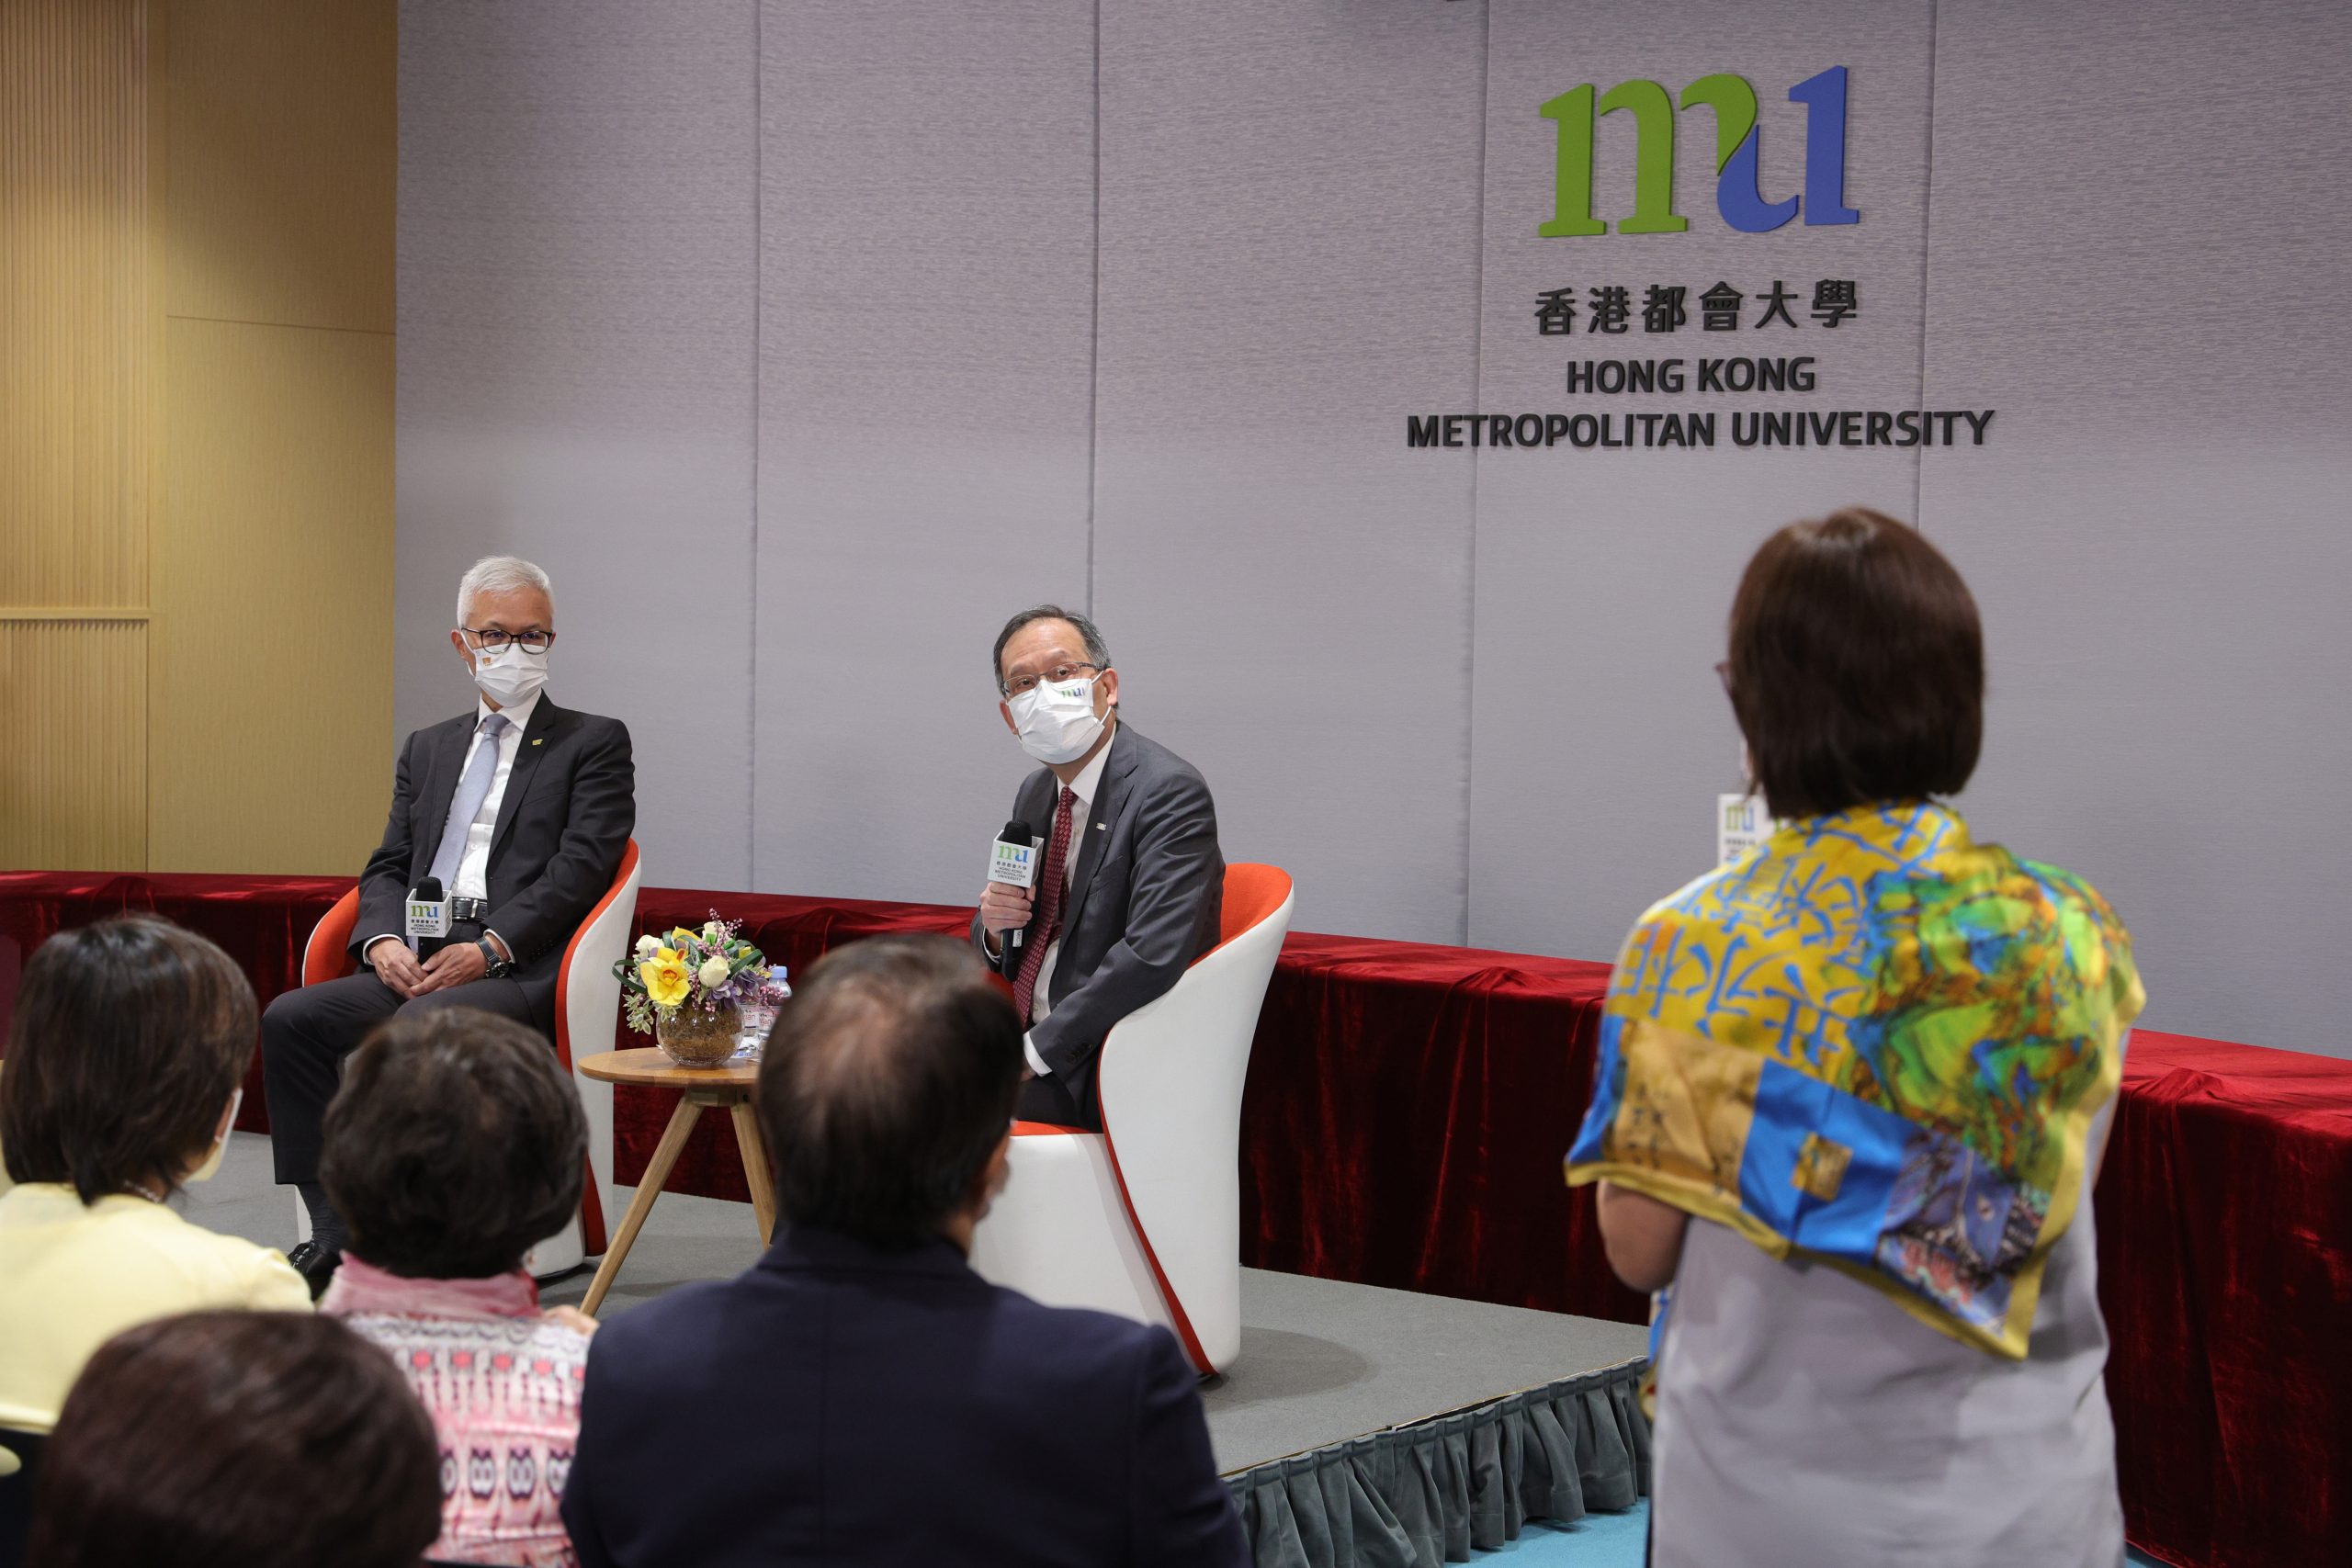 The participants enthusiastically ask questions during the question-and-answer session hosted by HKMU President Prof. Paul Lam Kwan-sing.